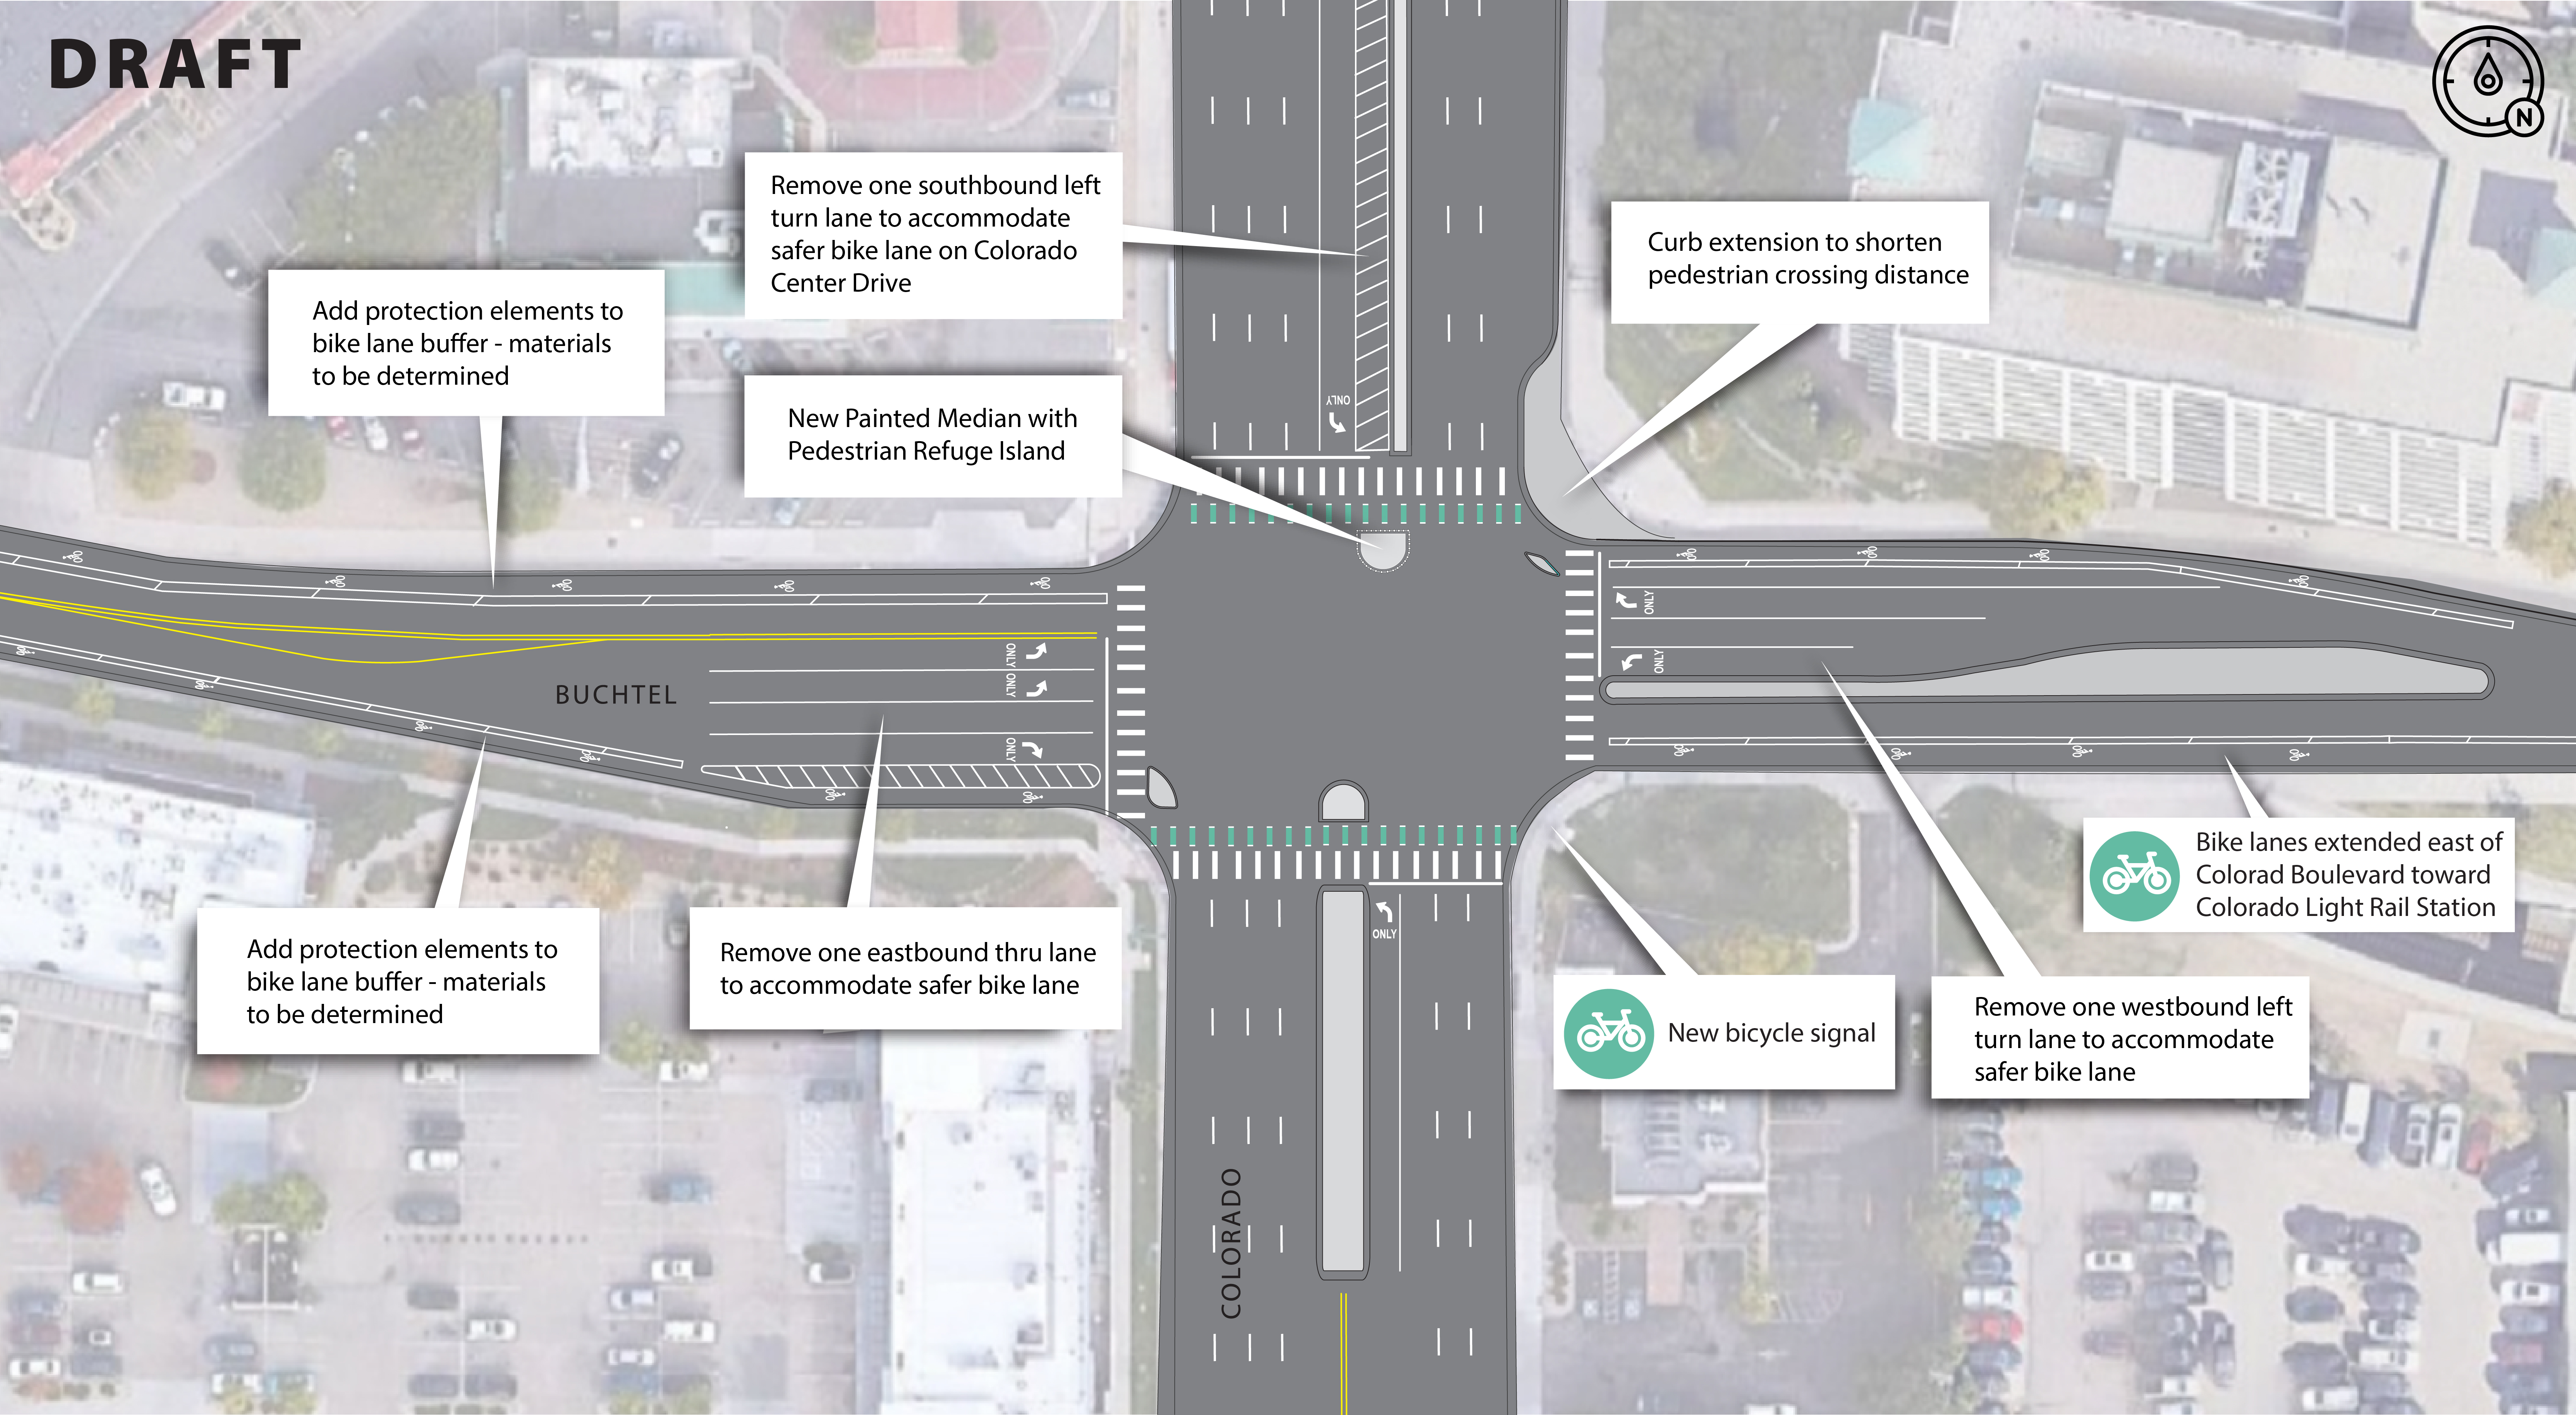 Illustration showing potential refinements for Colorado & Buchtel Intersection improvements which include, New Painted Median with Pedestrian Refuge Island, Curb extension to shorten pedestrian crossing distance, Bike lanes extended east of Colorad Boulevard toward  Colorado Light Rail Station, New bicycle signal, and Remove one eastbound thru lane to accommodate safer bike lane